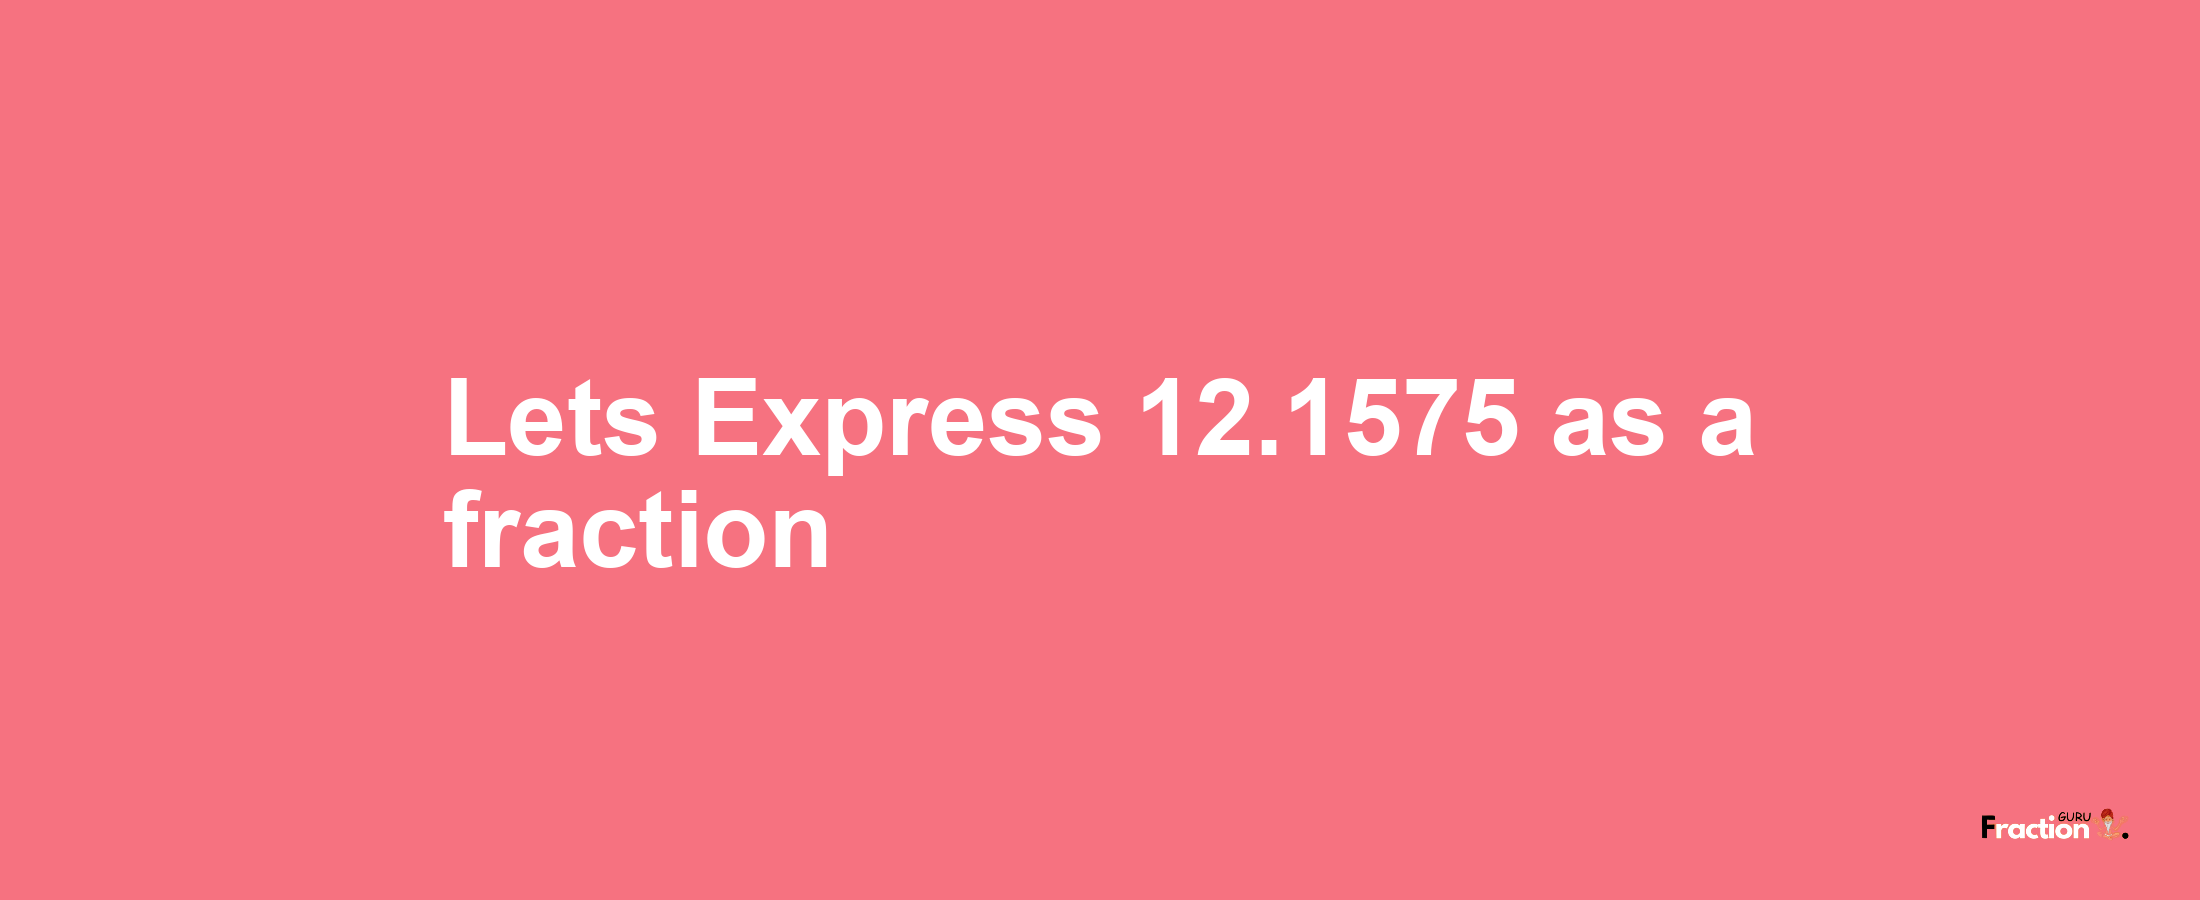 Lets Express 12.1575 as afraction